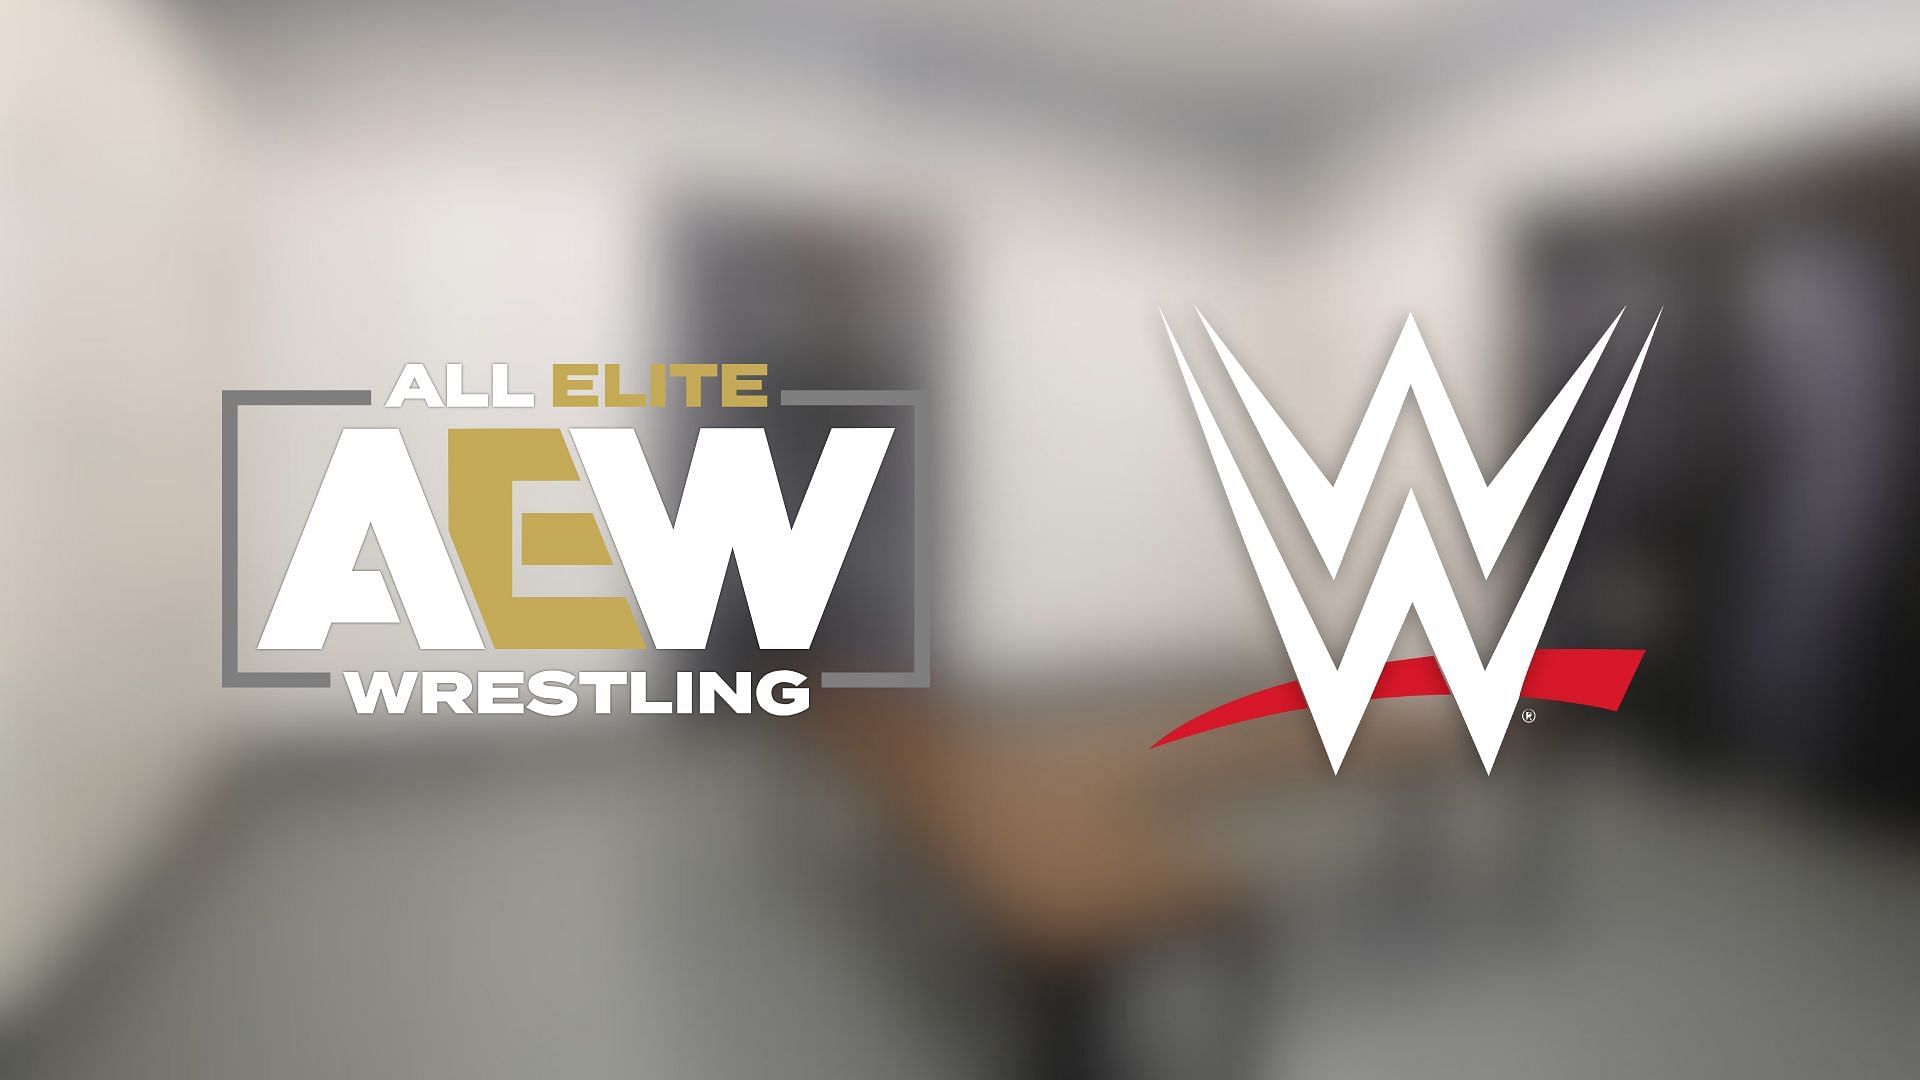 Which former WWE Superstar were AEW sad to see leave?